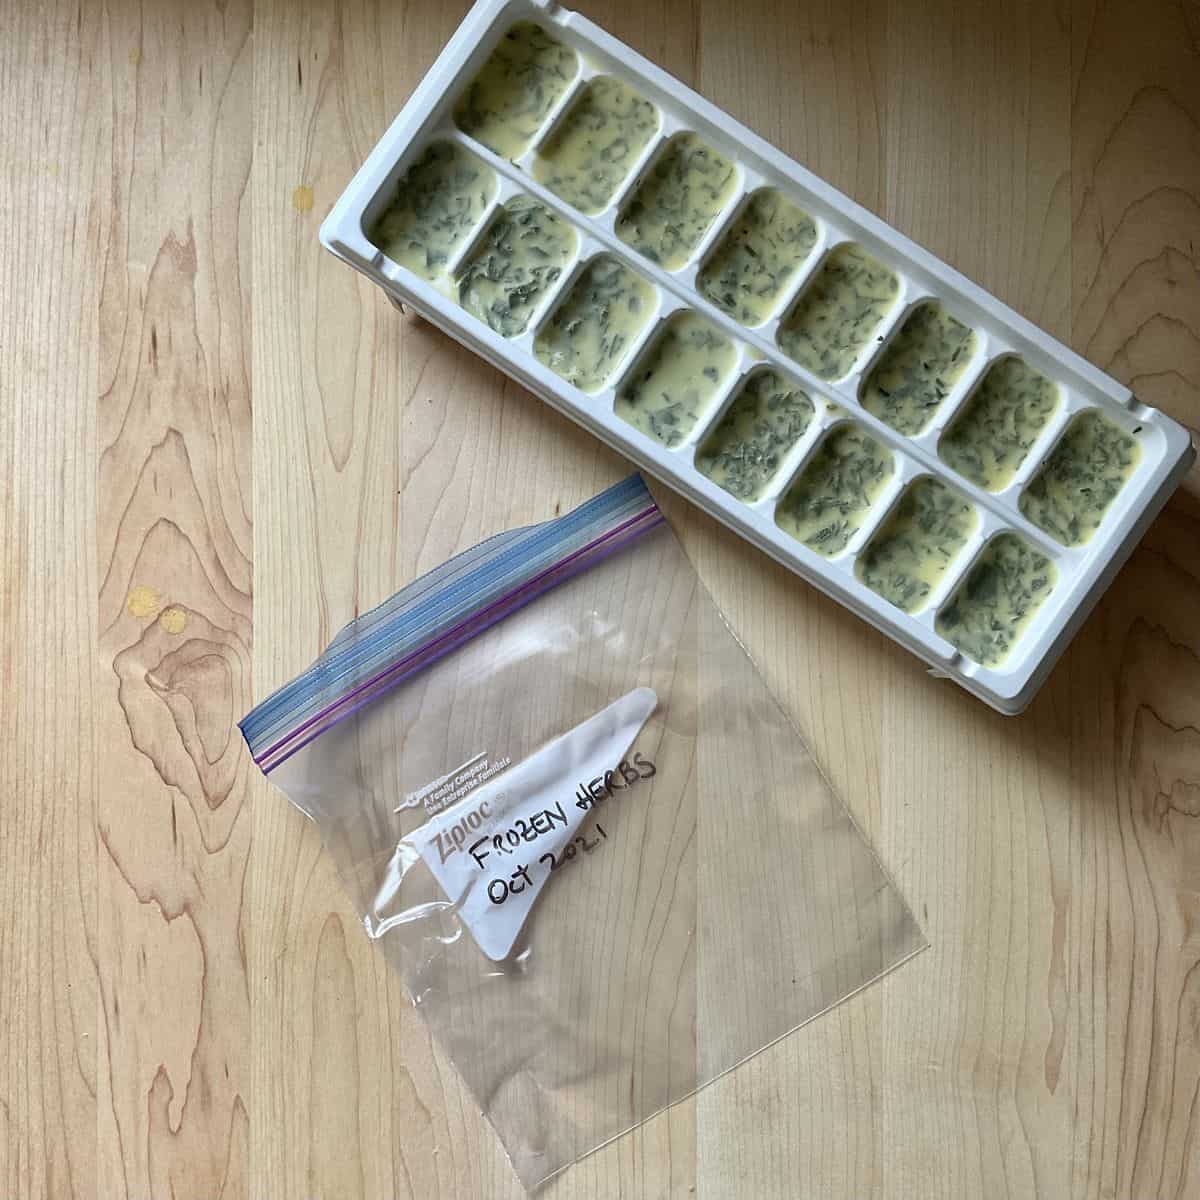 An ice cube tray of herbs next to a Ziploc bag.